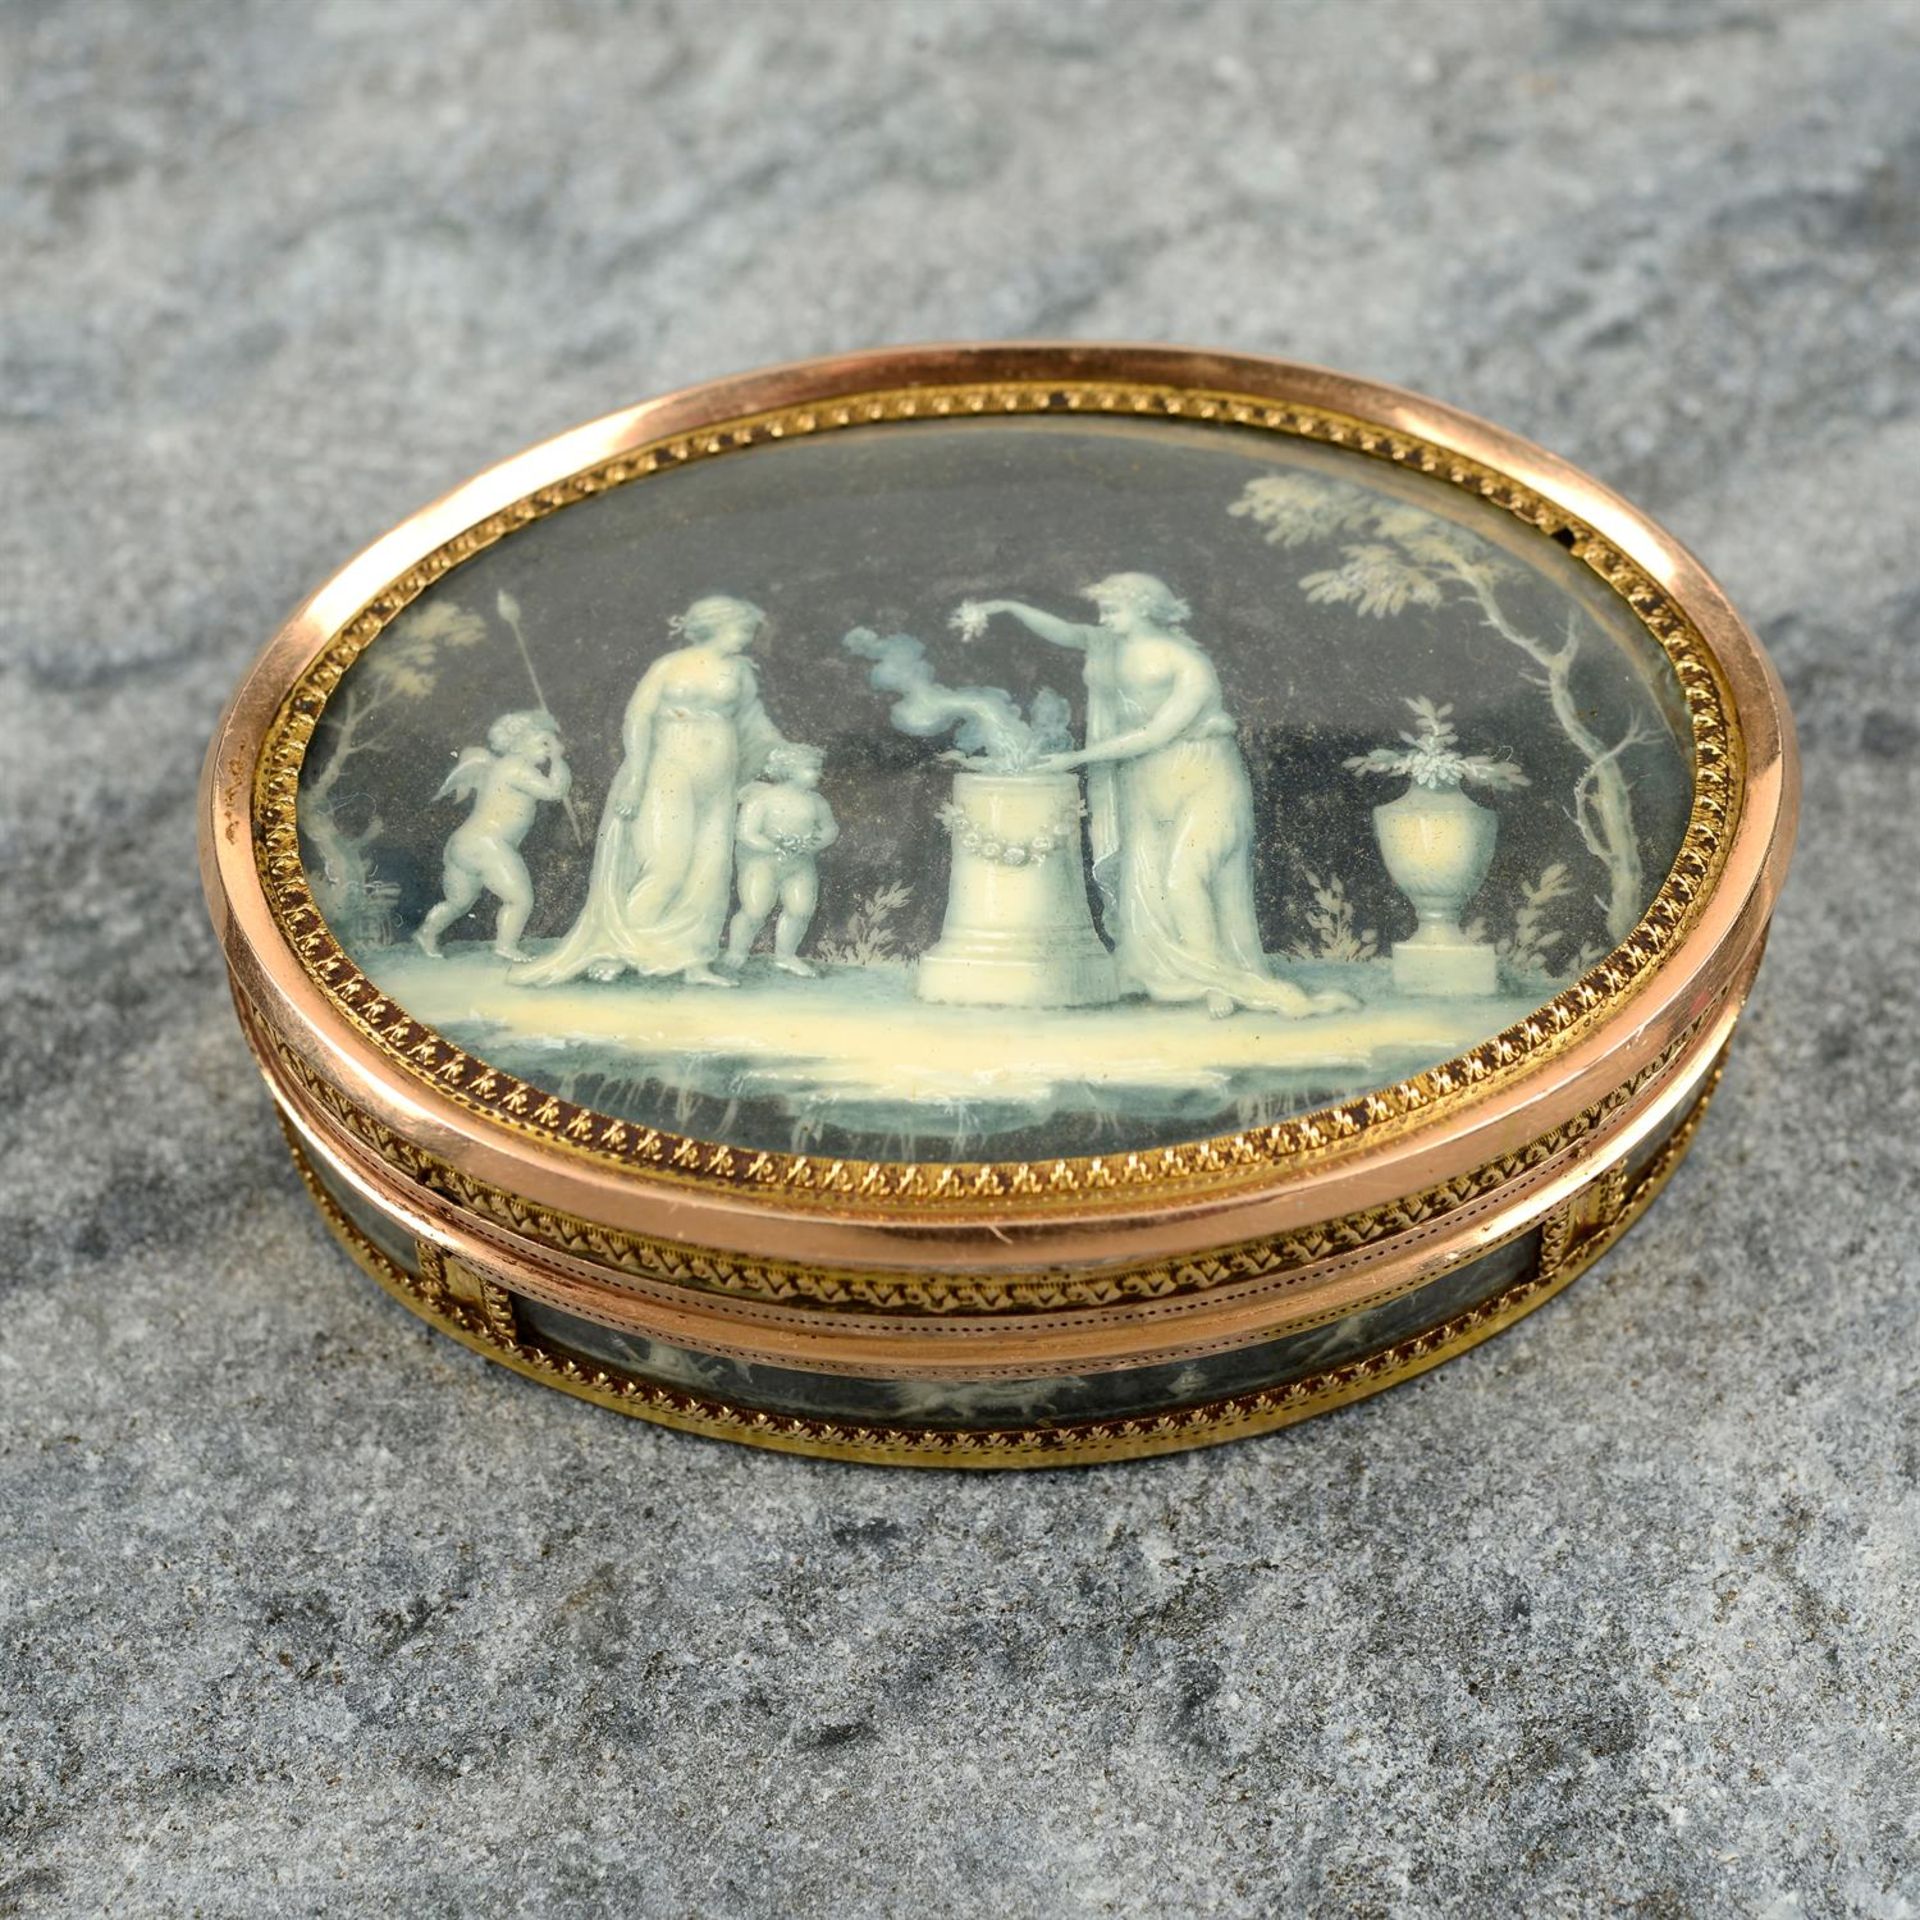 A late 18th/early 19th century gold painted box, the lid believed to depict a version of 'Le